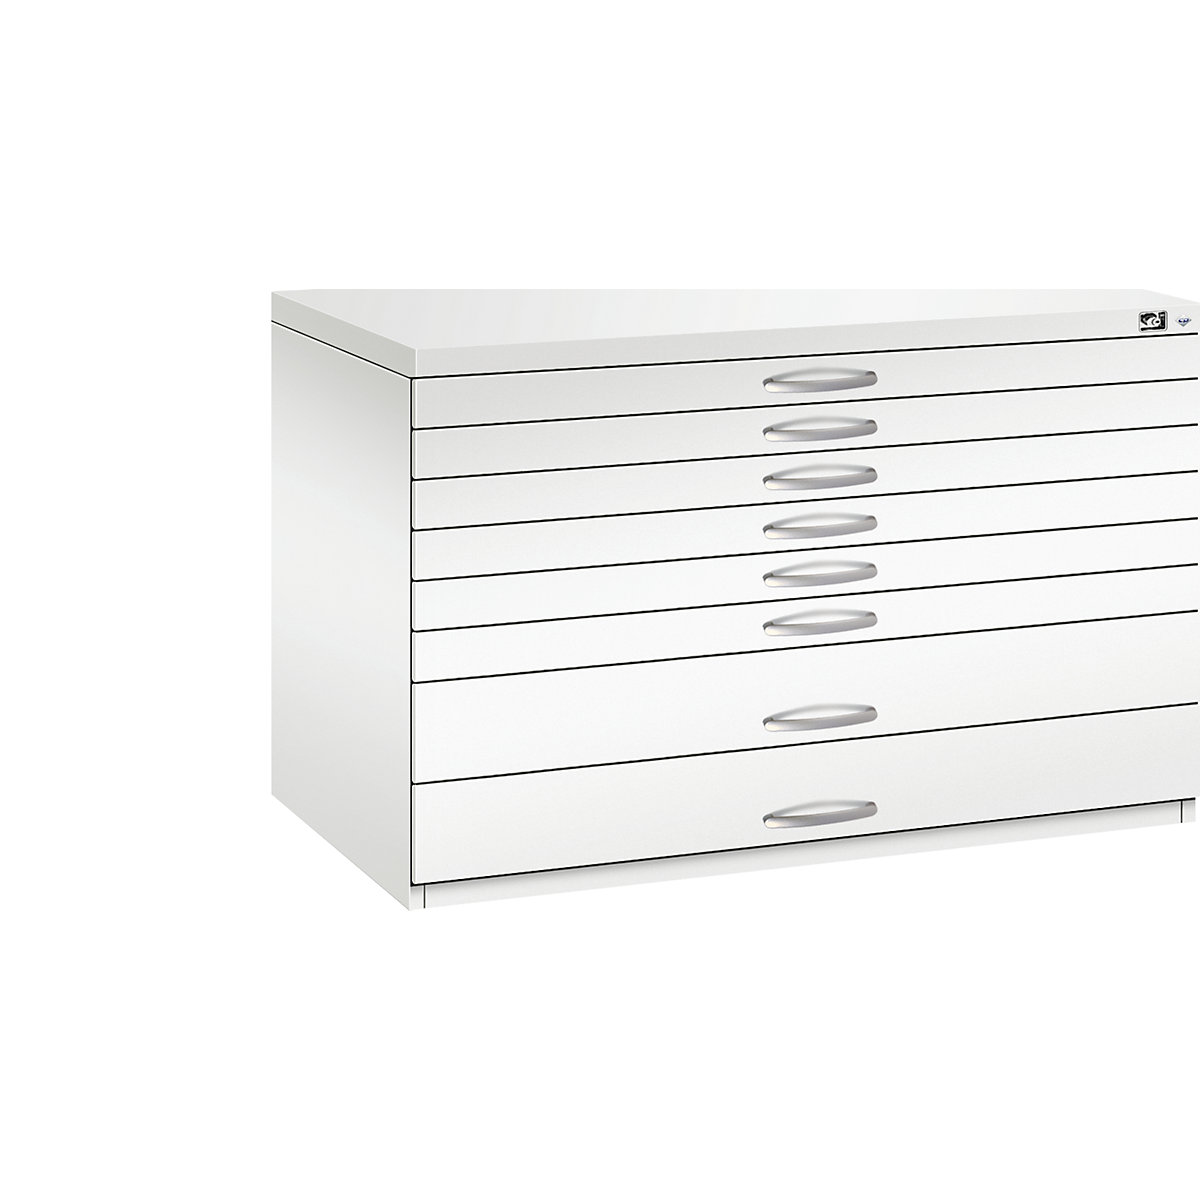 Drawing cabinet – C+P, A1, 8 drawers, height 760 mm, traffic white-19